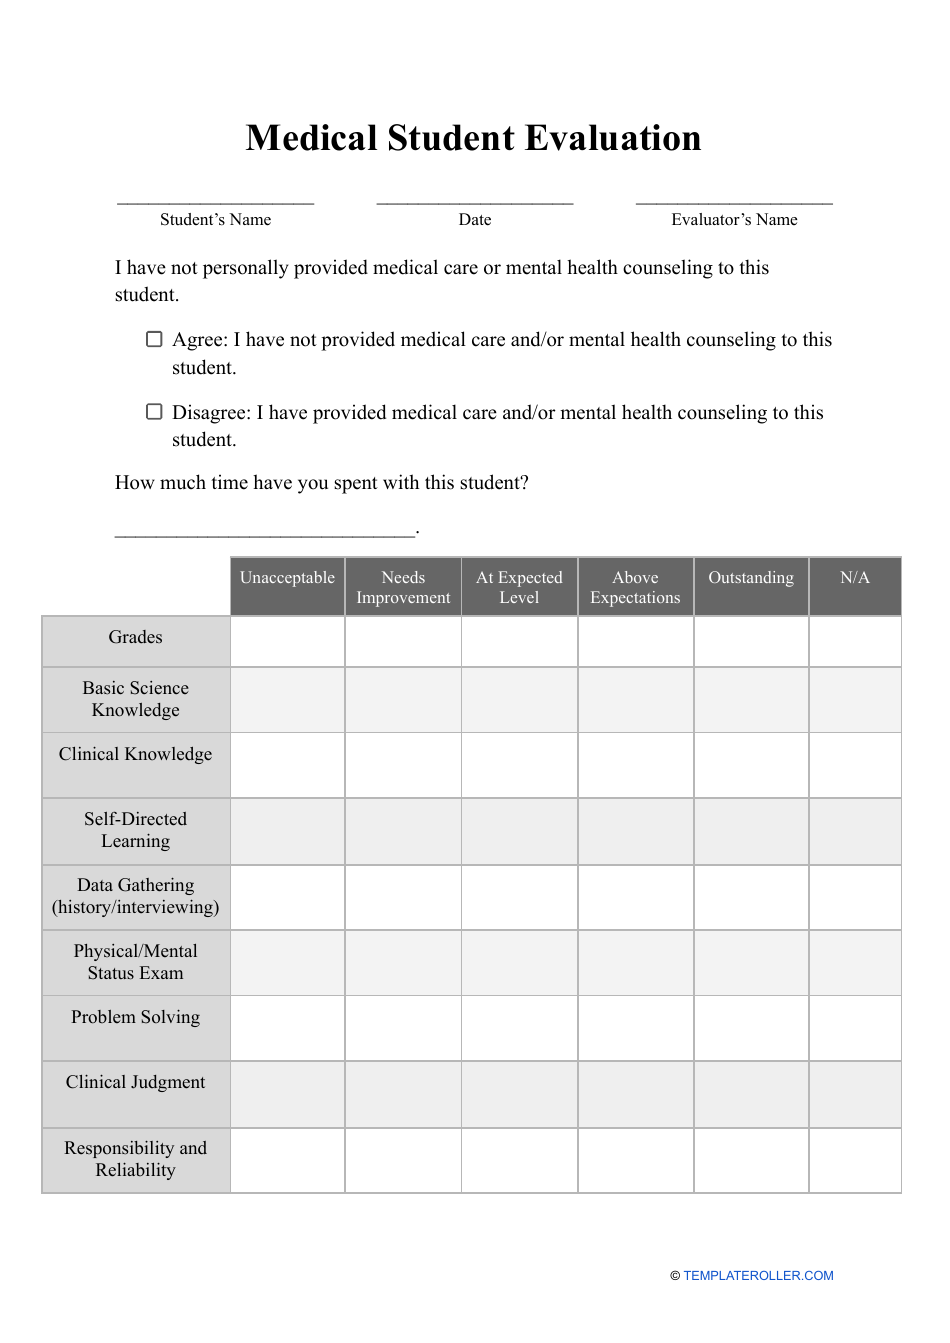 Medical Student Evaluation Form, Page 1